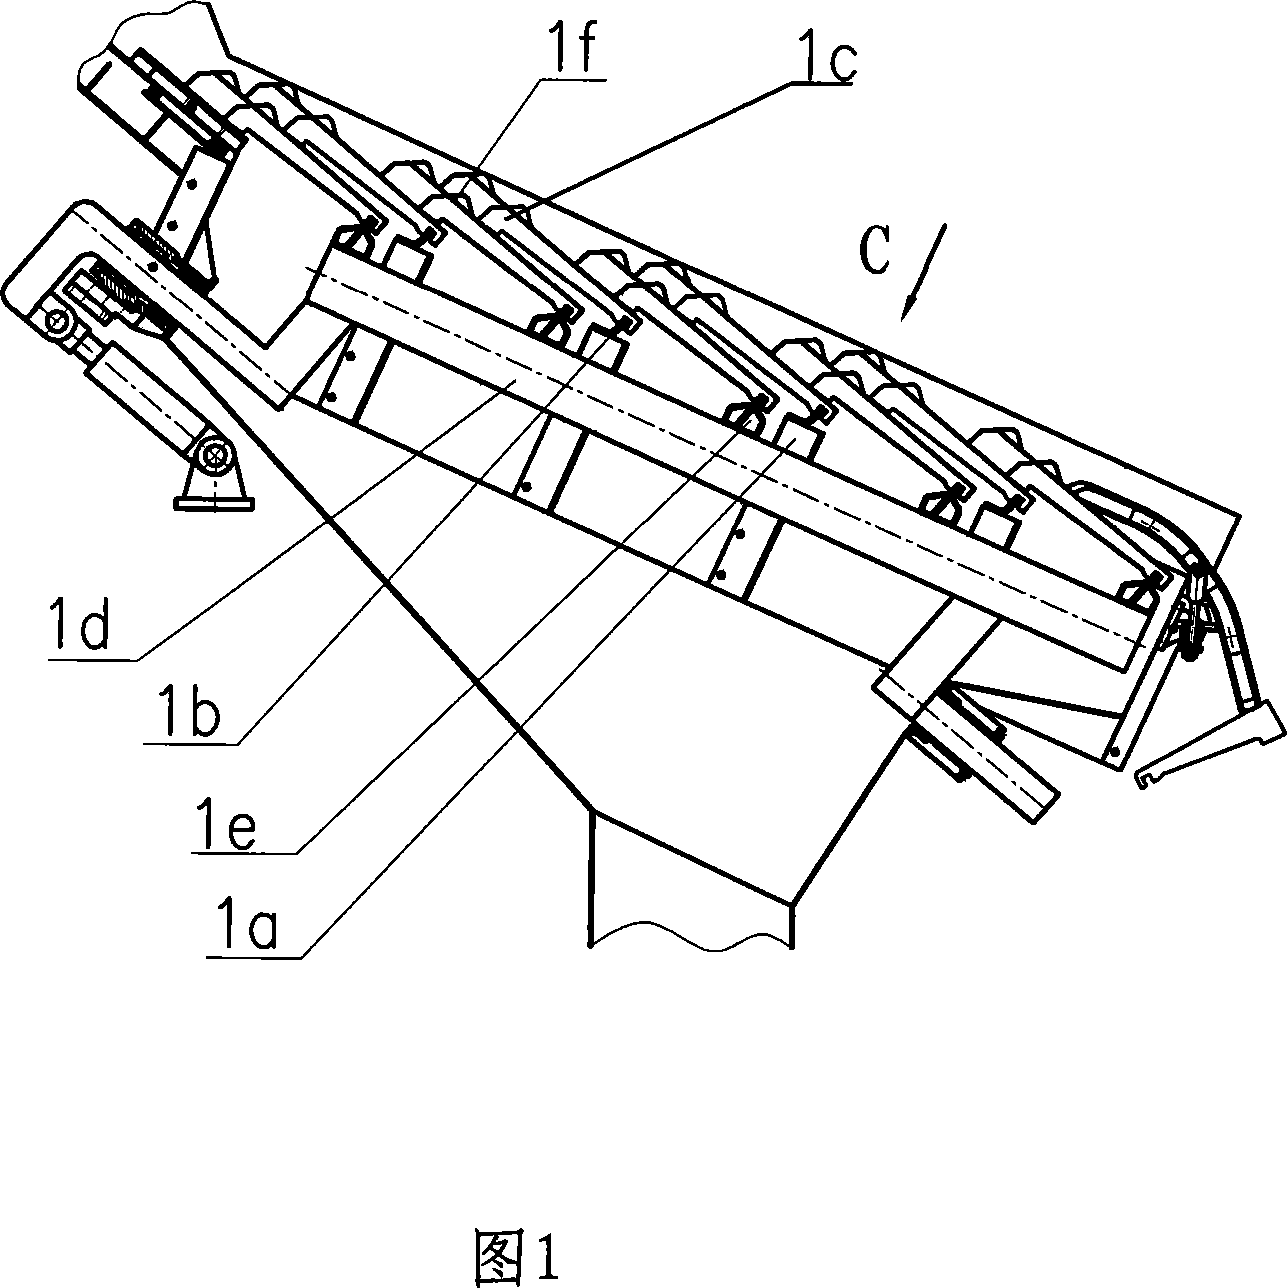 Lateral motion reciprocating fire grate system